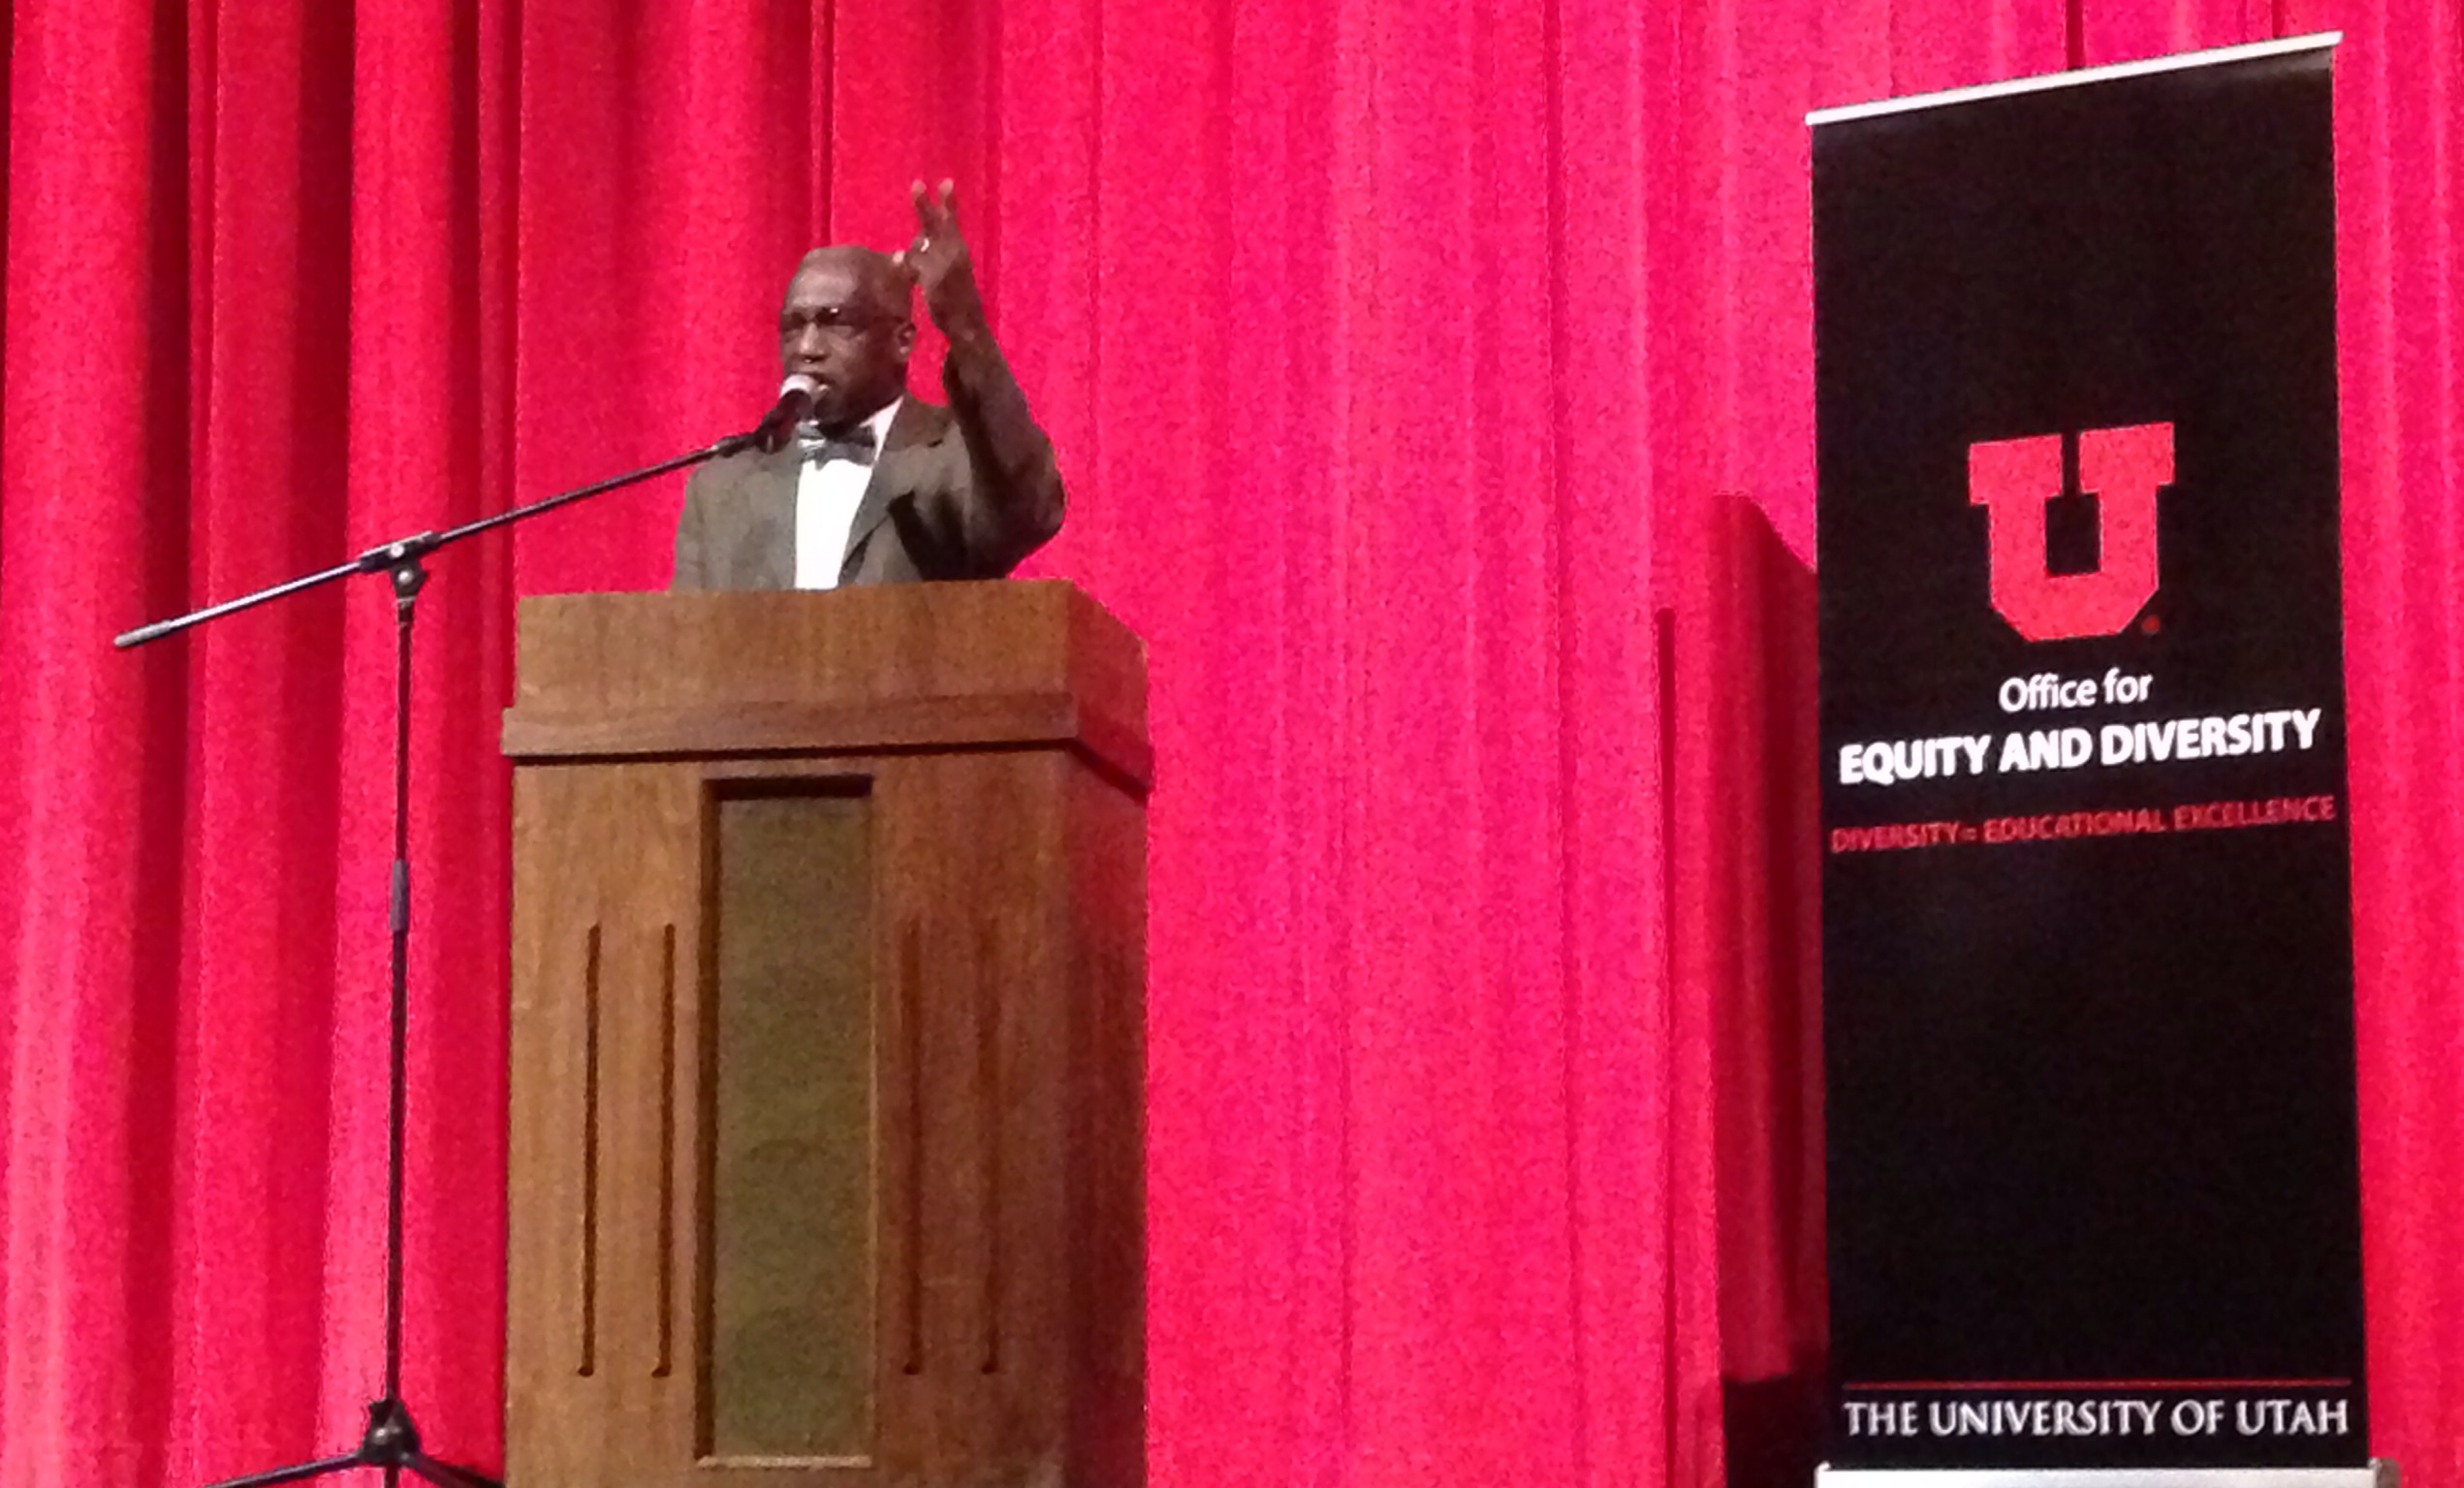 The Reverend France A. Davis speaks at East High School in Salt Lake City on Martin Luther King Day.